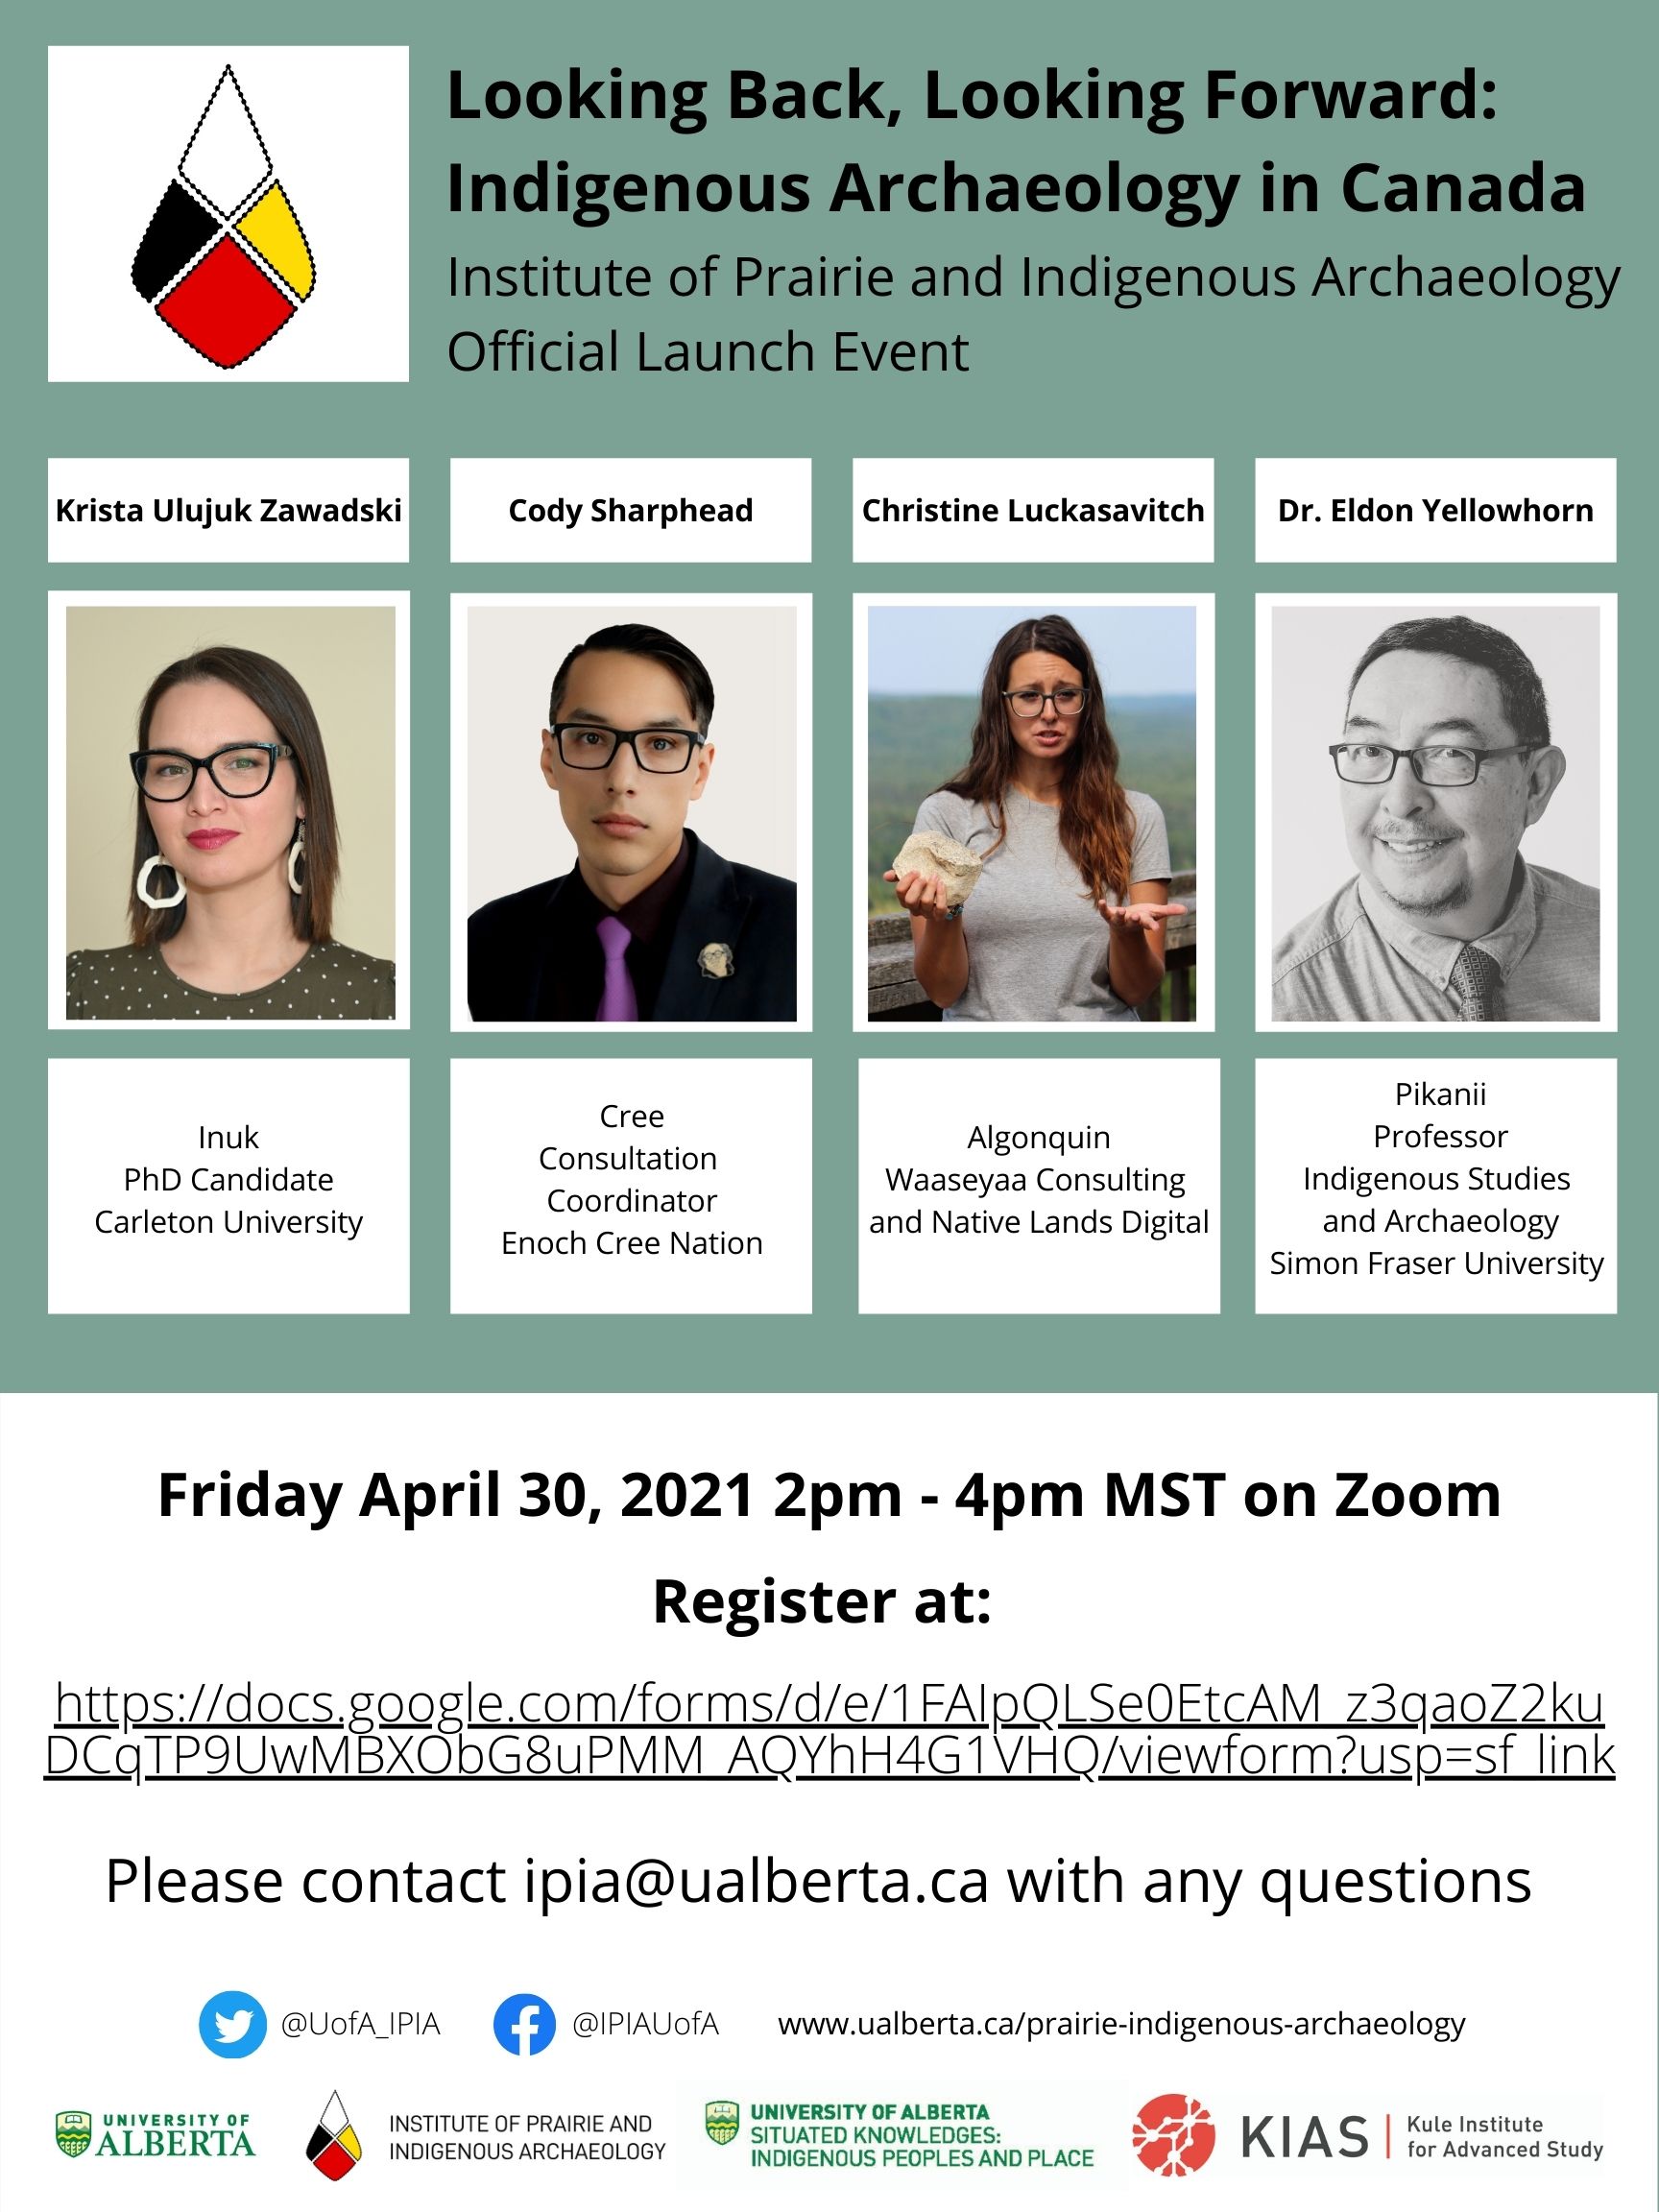 Poster for the IPIA Launch Event on April 30 2021